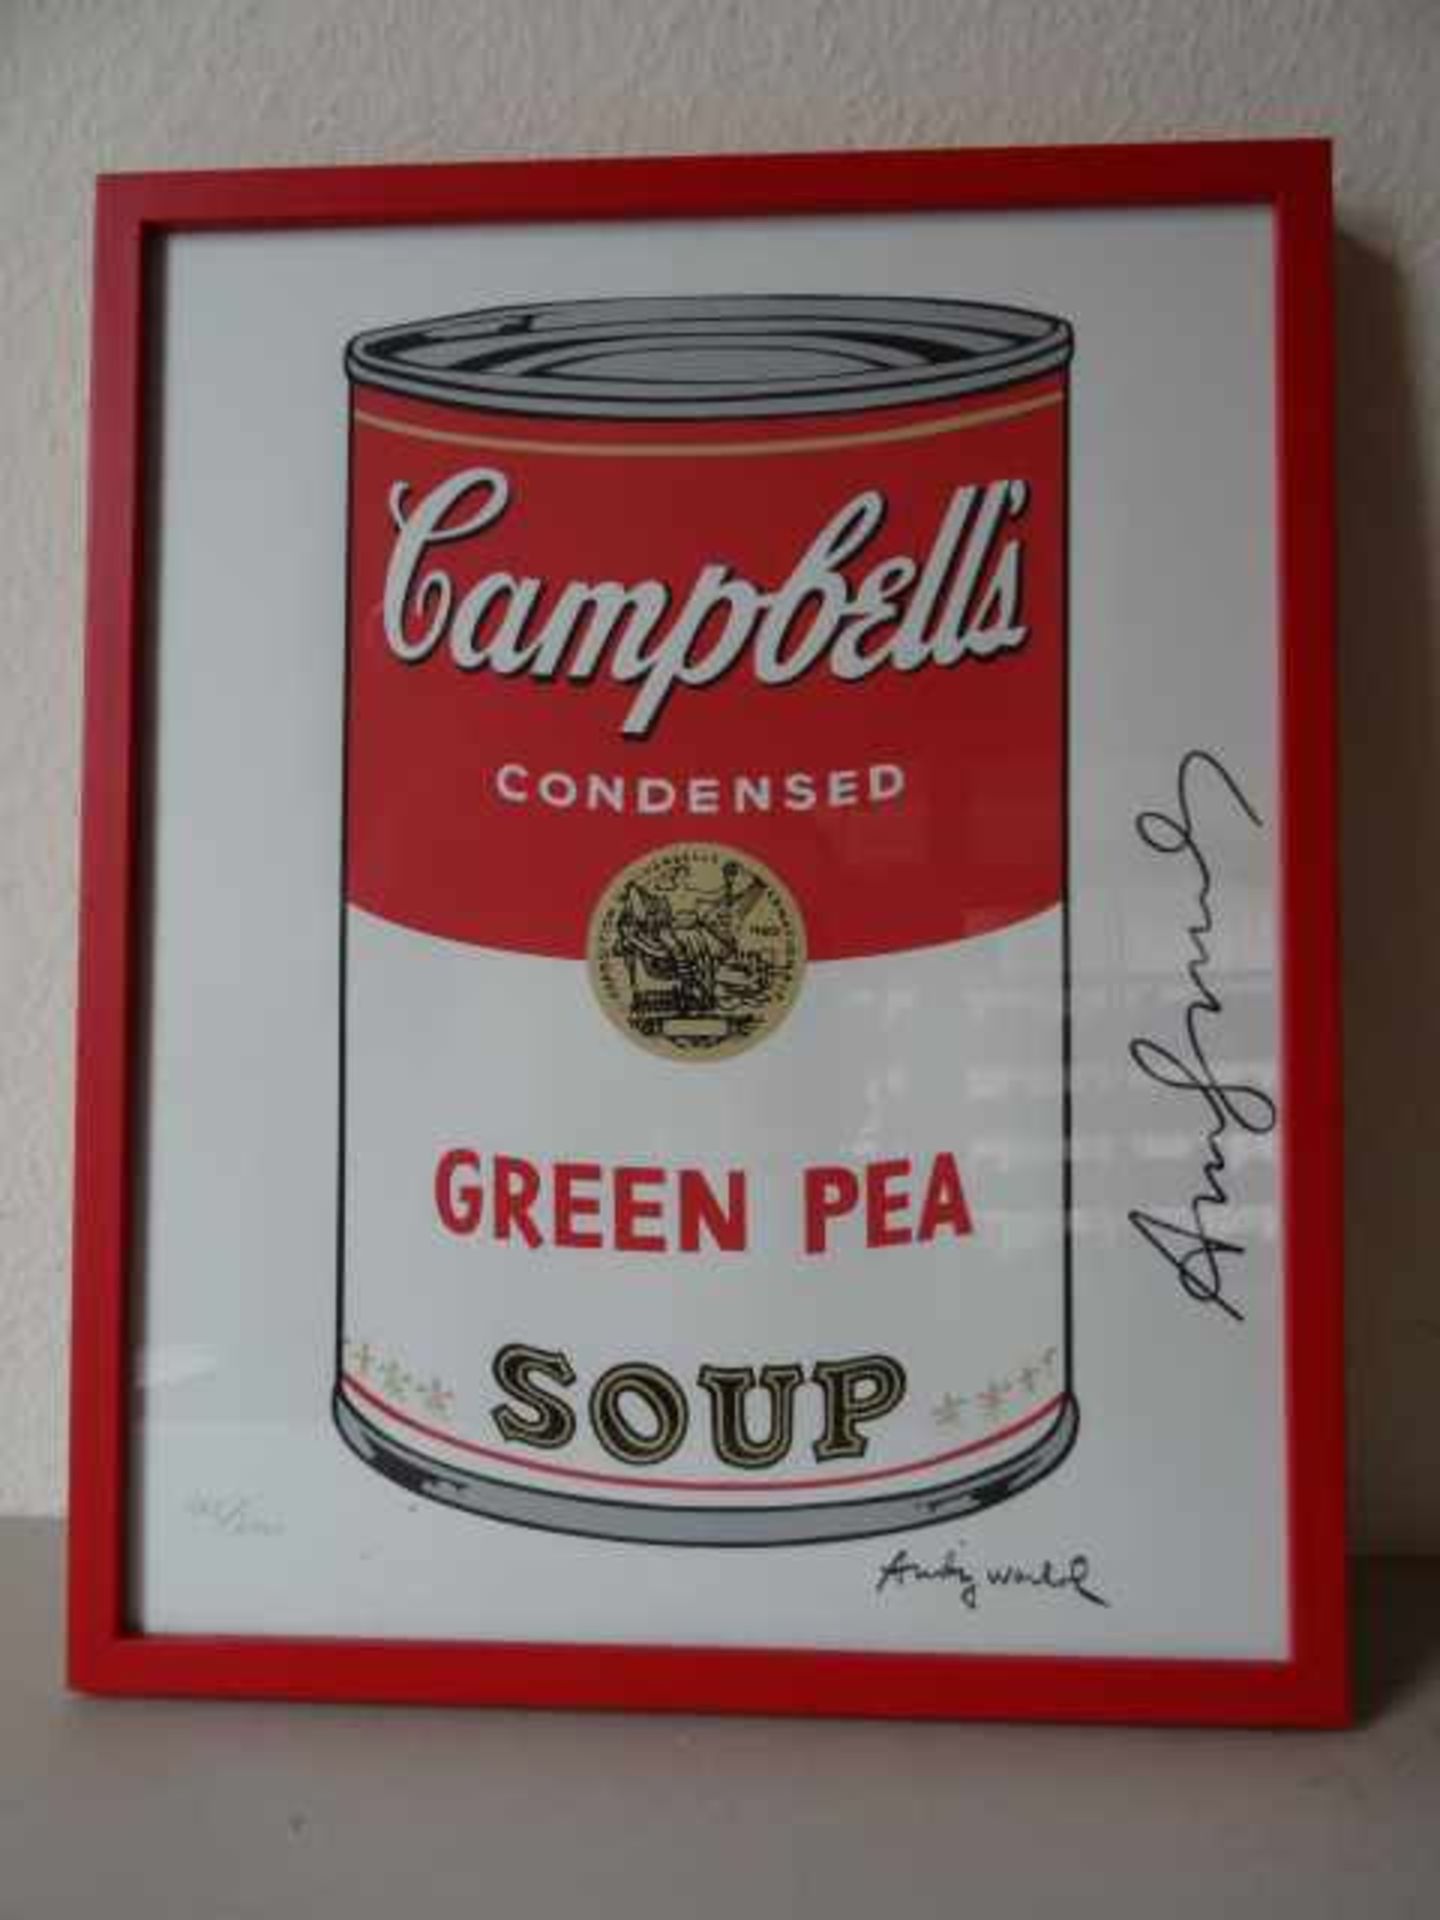 Warhol, Andy (Pittsburgh 1928 - 1987 New York). Campbell's Green Pea Soup. Farbserigraphie von 1986. - Bild 2 aus 5